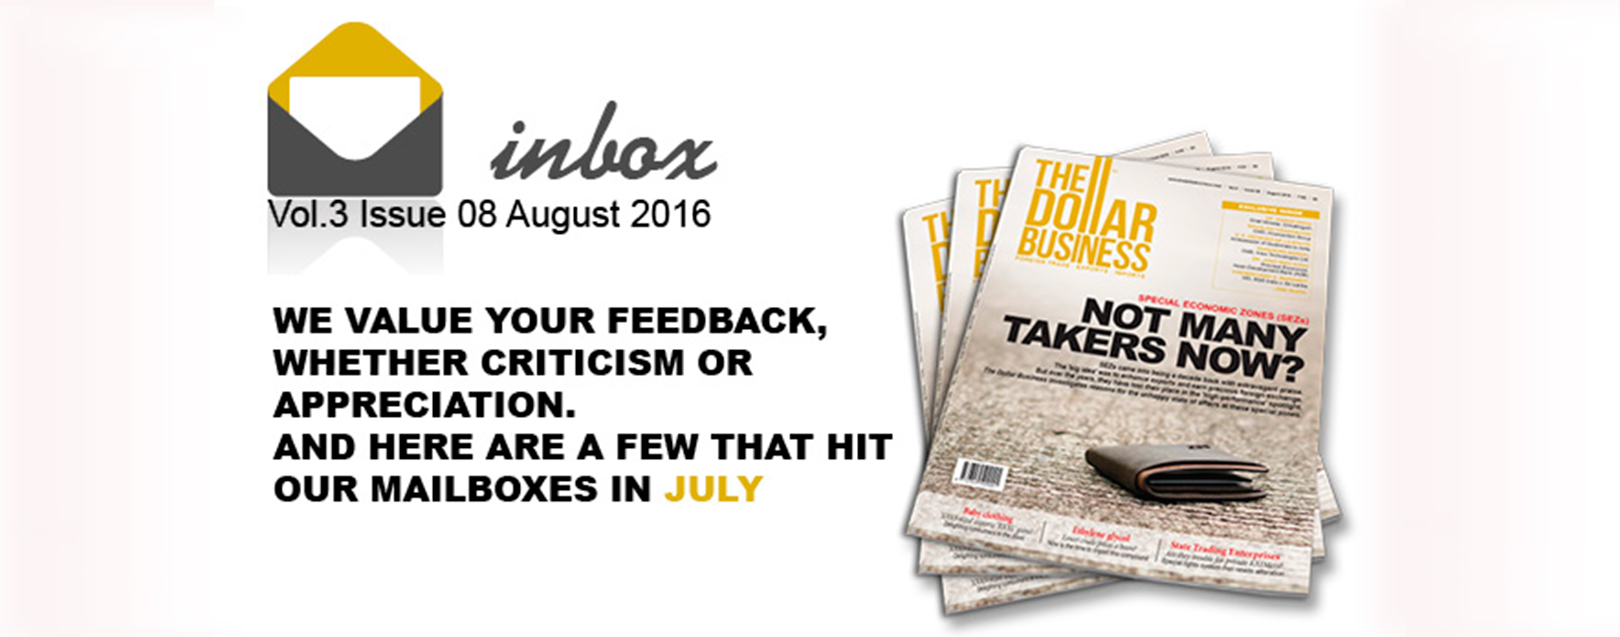 Inbox August 2016 March 2018 issue